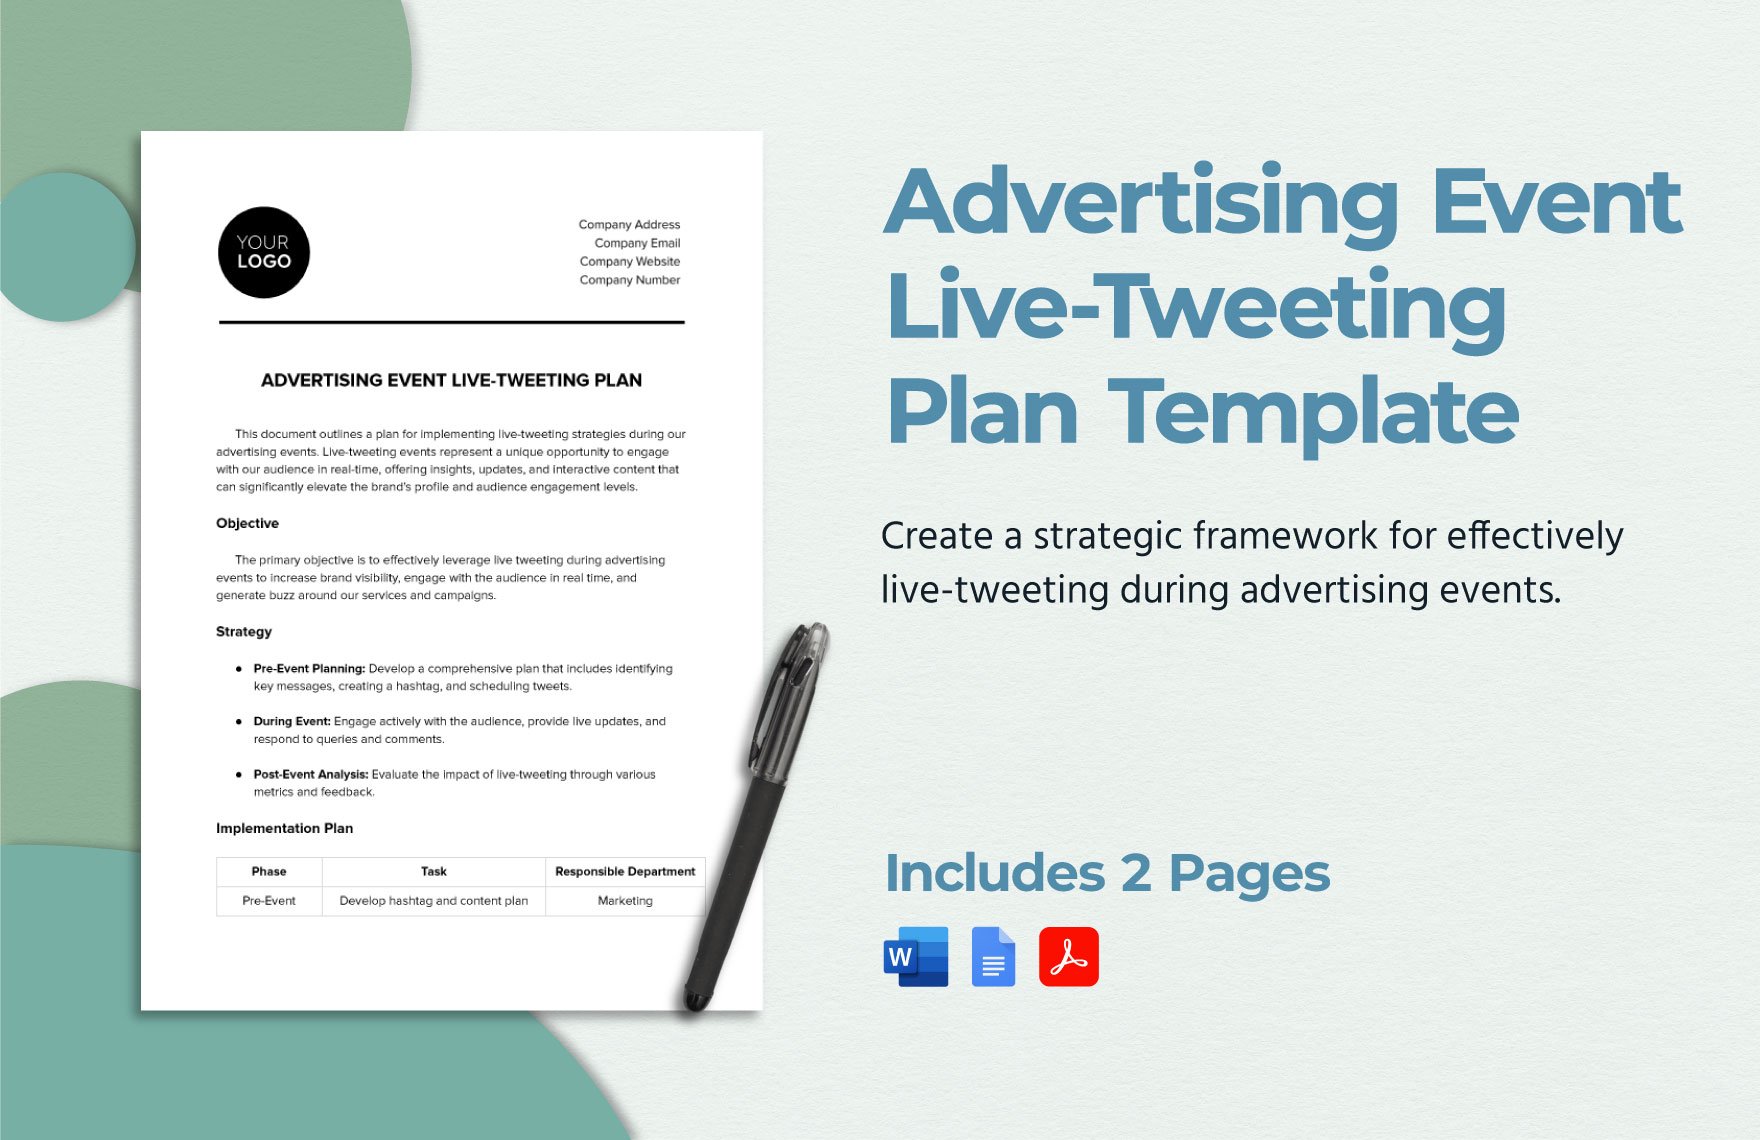 Advertising Event Live-Tweeting Plan Template